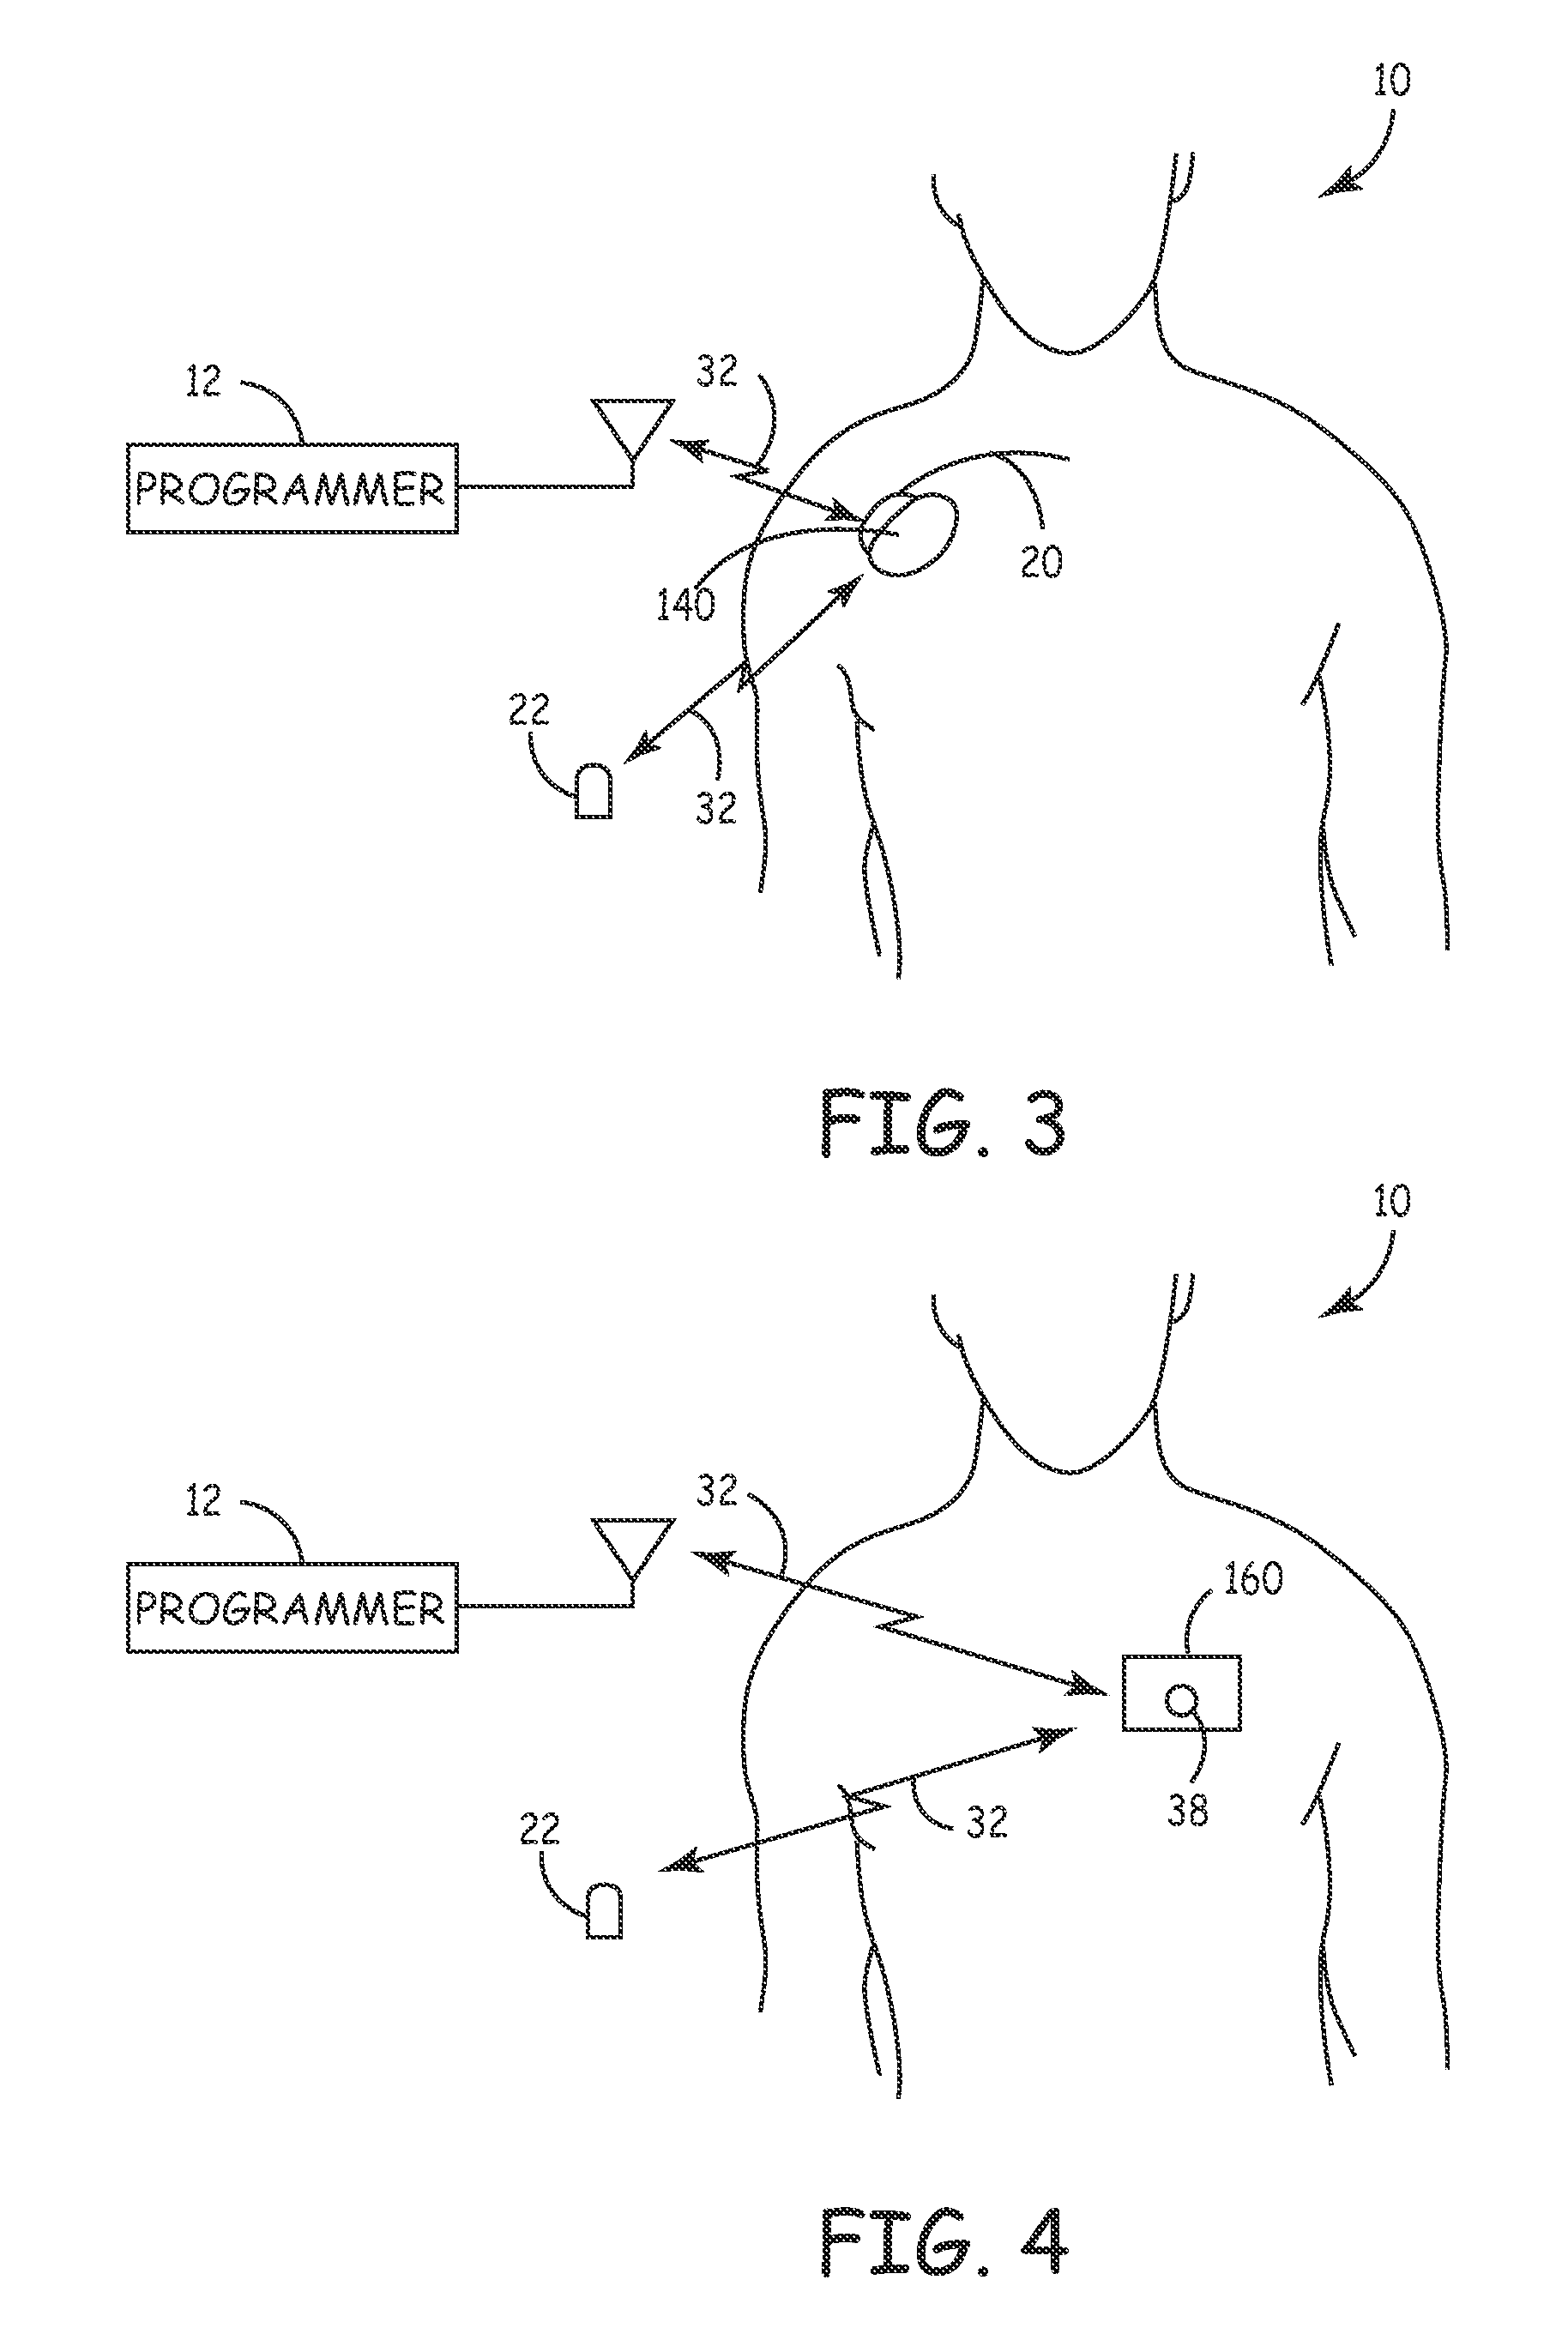 System and method for monitoring cardiac signal activity in patients with nervous system disorders